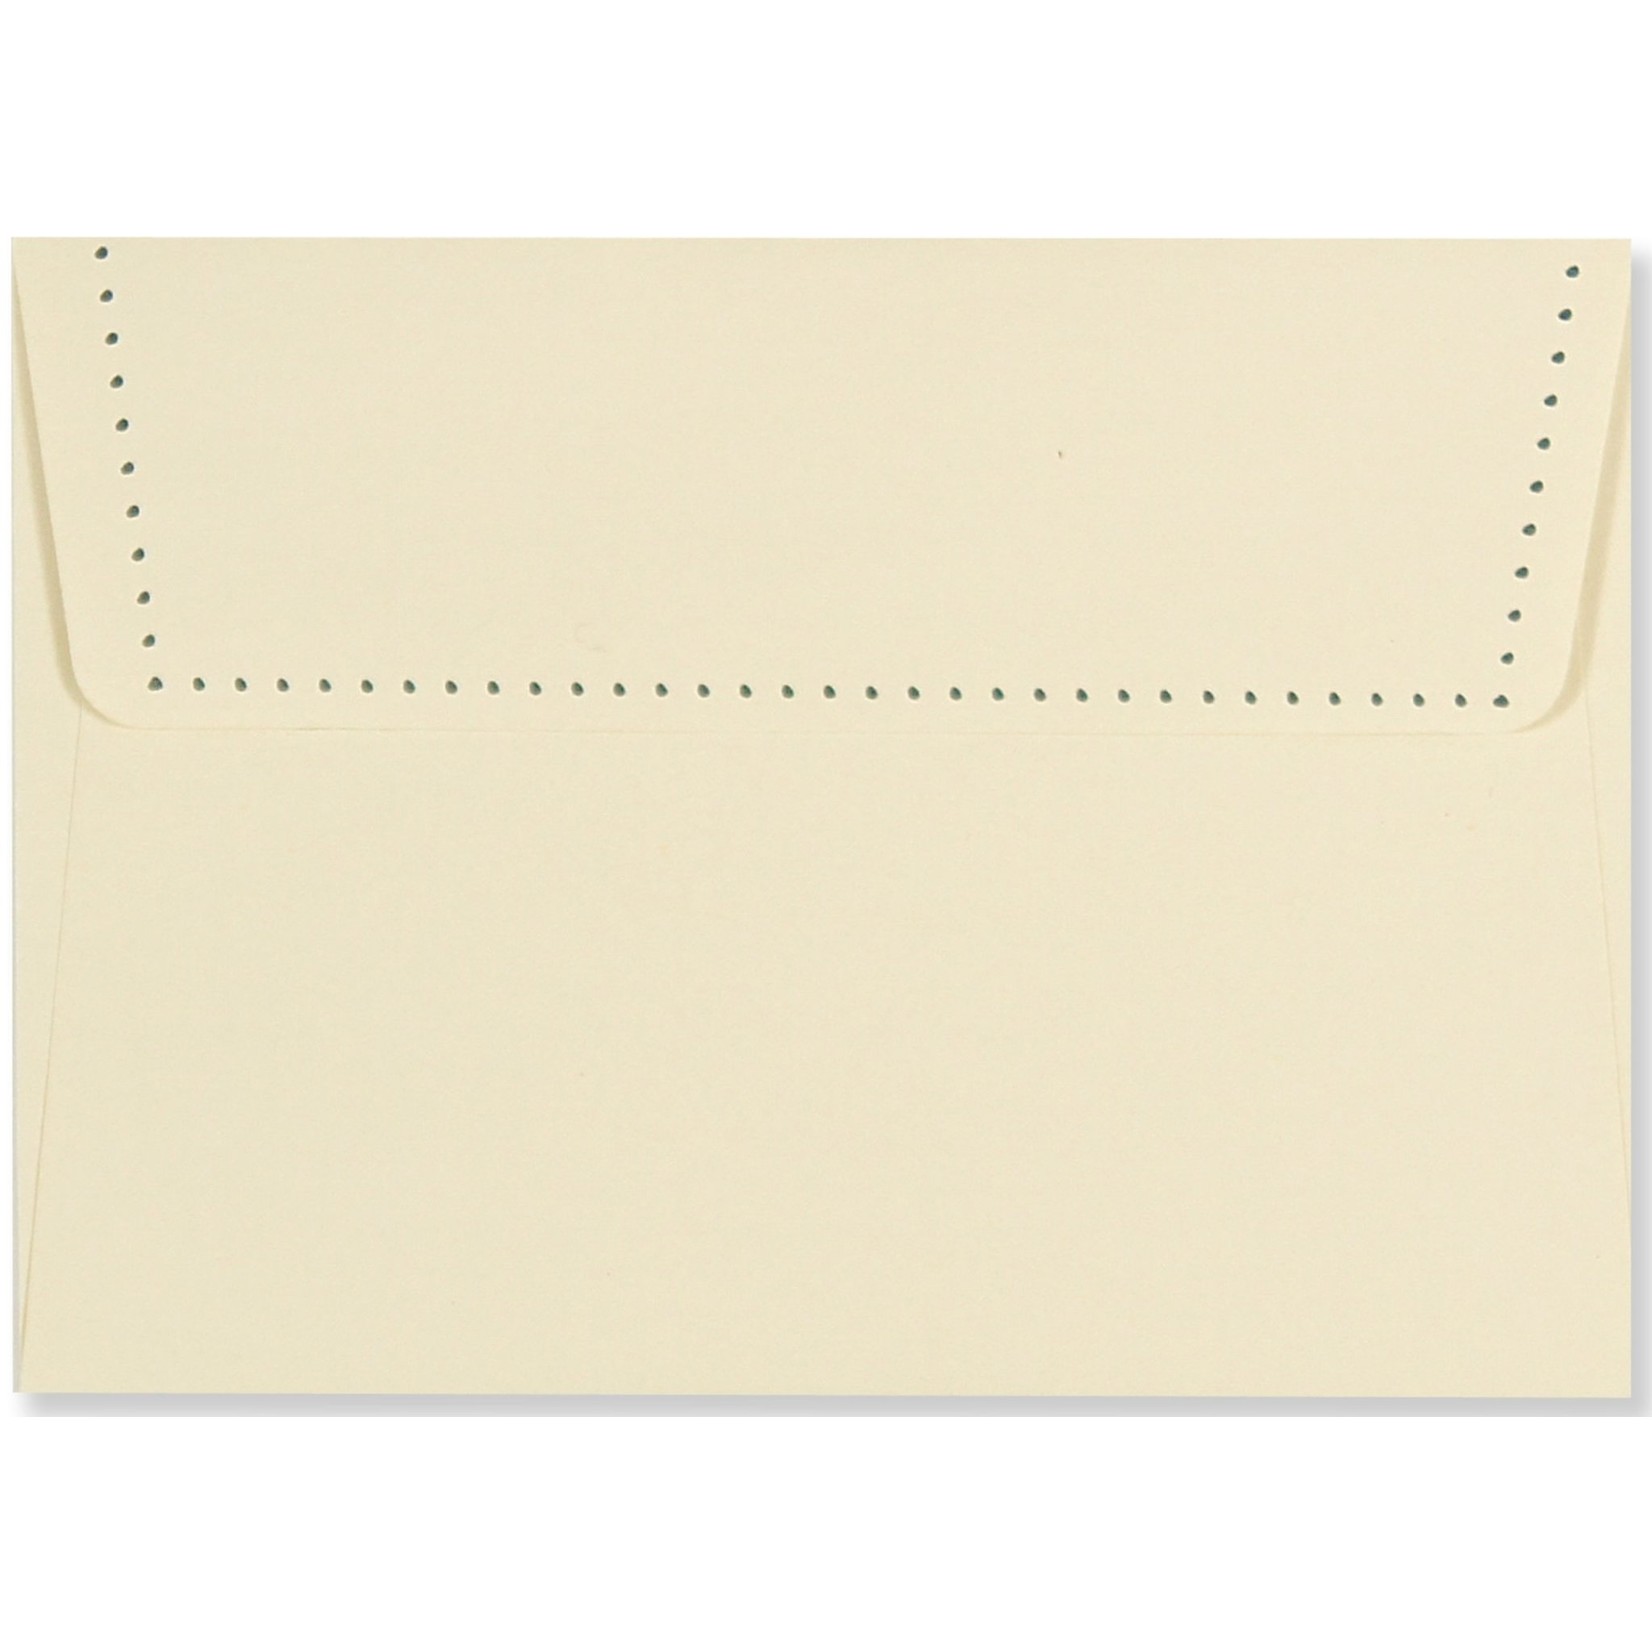 Peter Pauper Press Boxed Note Cards: Typewriter